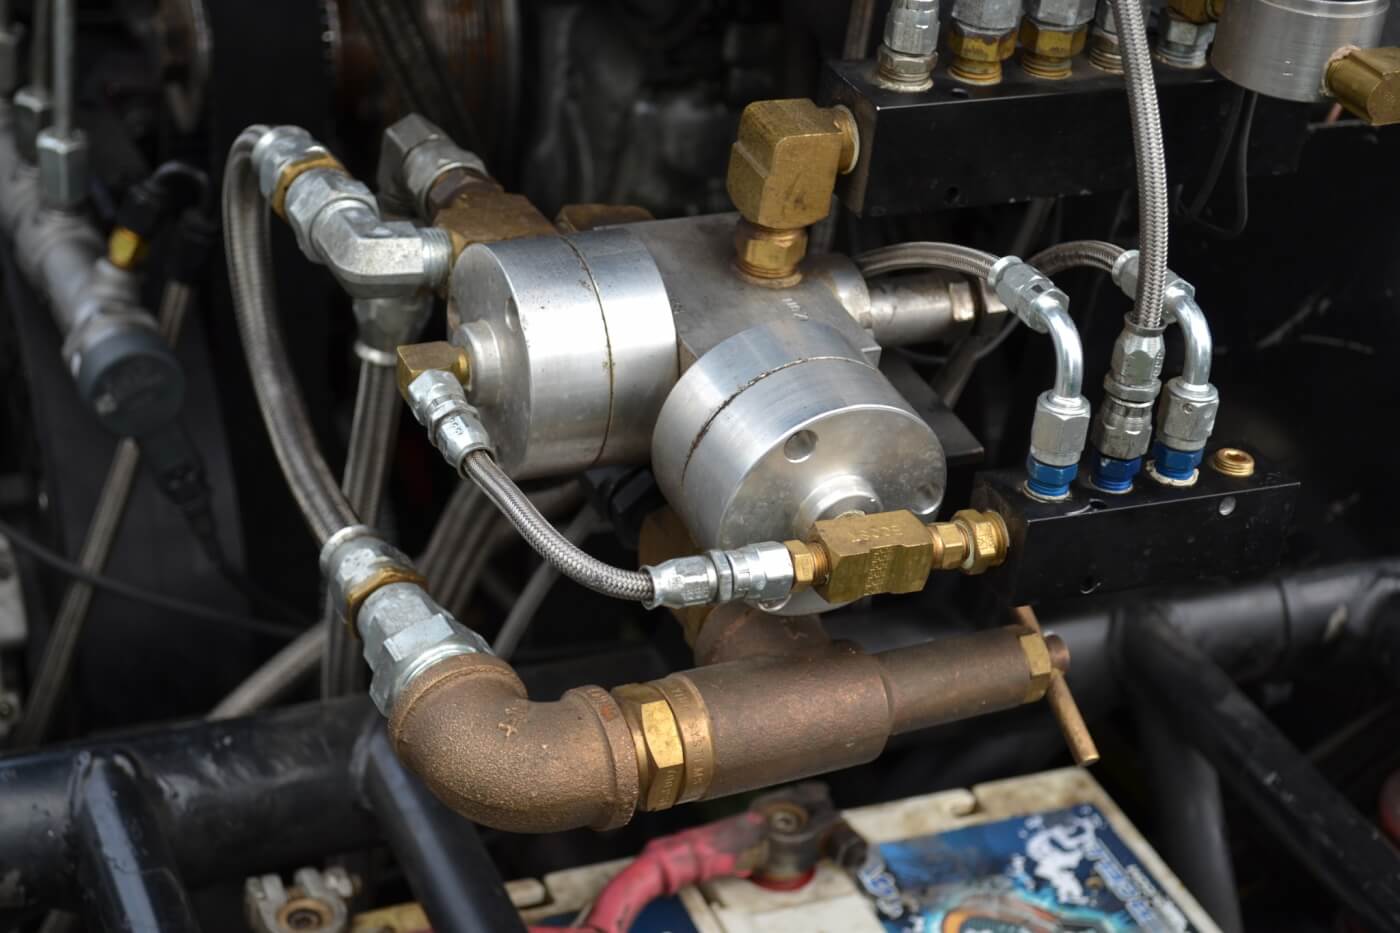 Kyle informed us that a water injection system is vital in an application such as this. The 1,000-psi mechanical setup is used to set EGT wherever Kyle wants. "If it's not a points pull, we can drop the EGT as low as 1,300 degrees, but we'll lose as much as 200 horsepower." Full tilt, Kyle runs 1,500 to 1,600 degrees for maximum power.